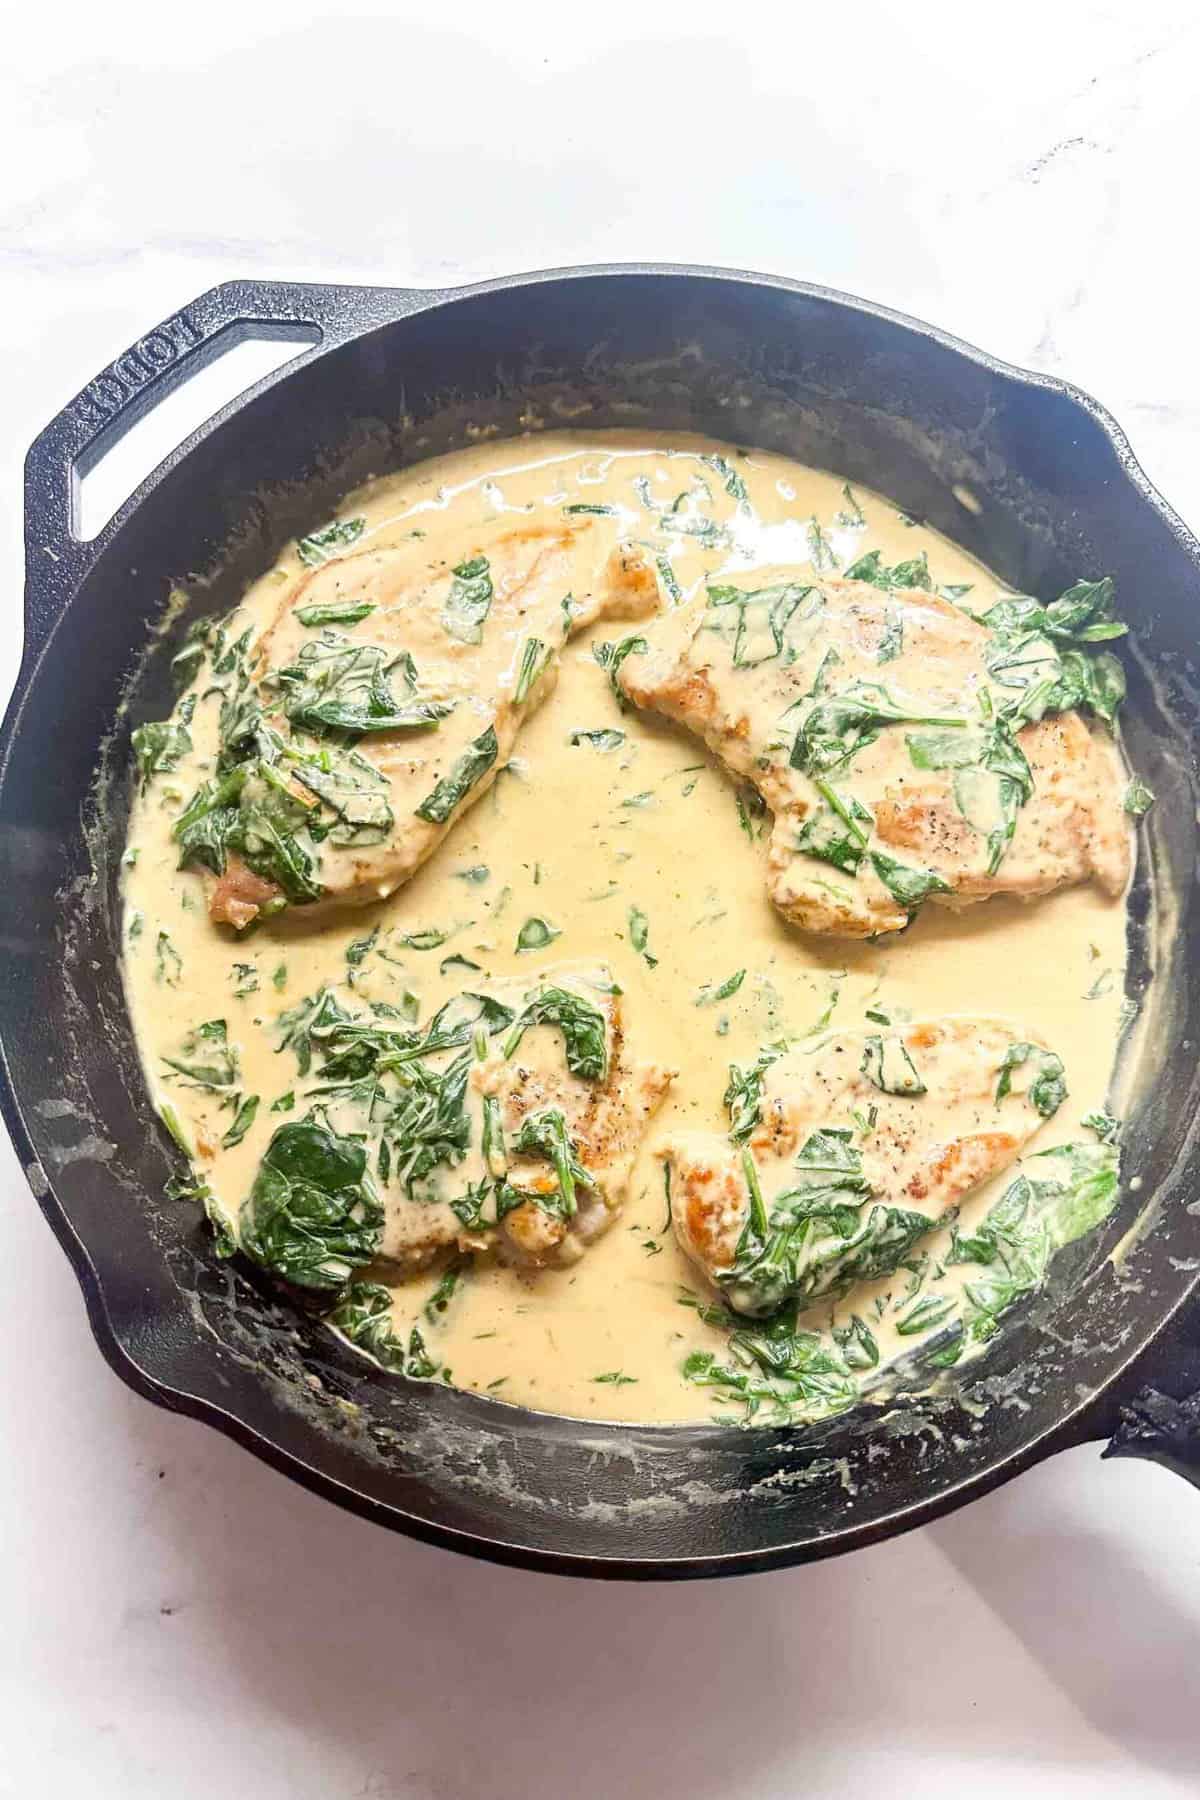 chicken breasts cooking in boursin sauce in a cast iron skillet